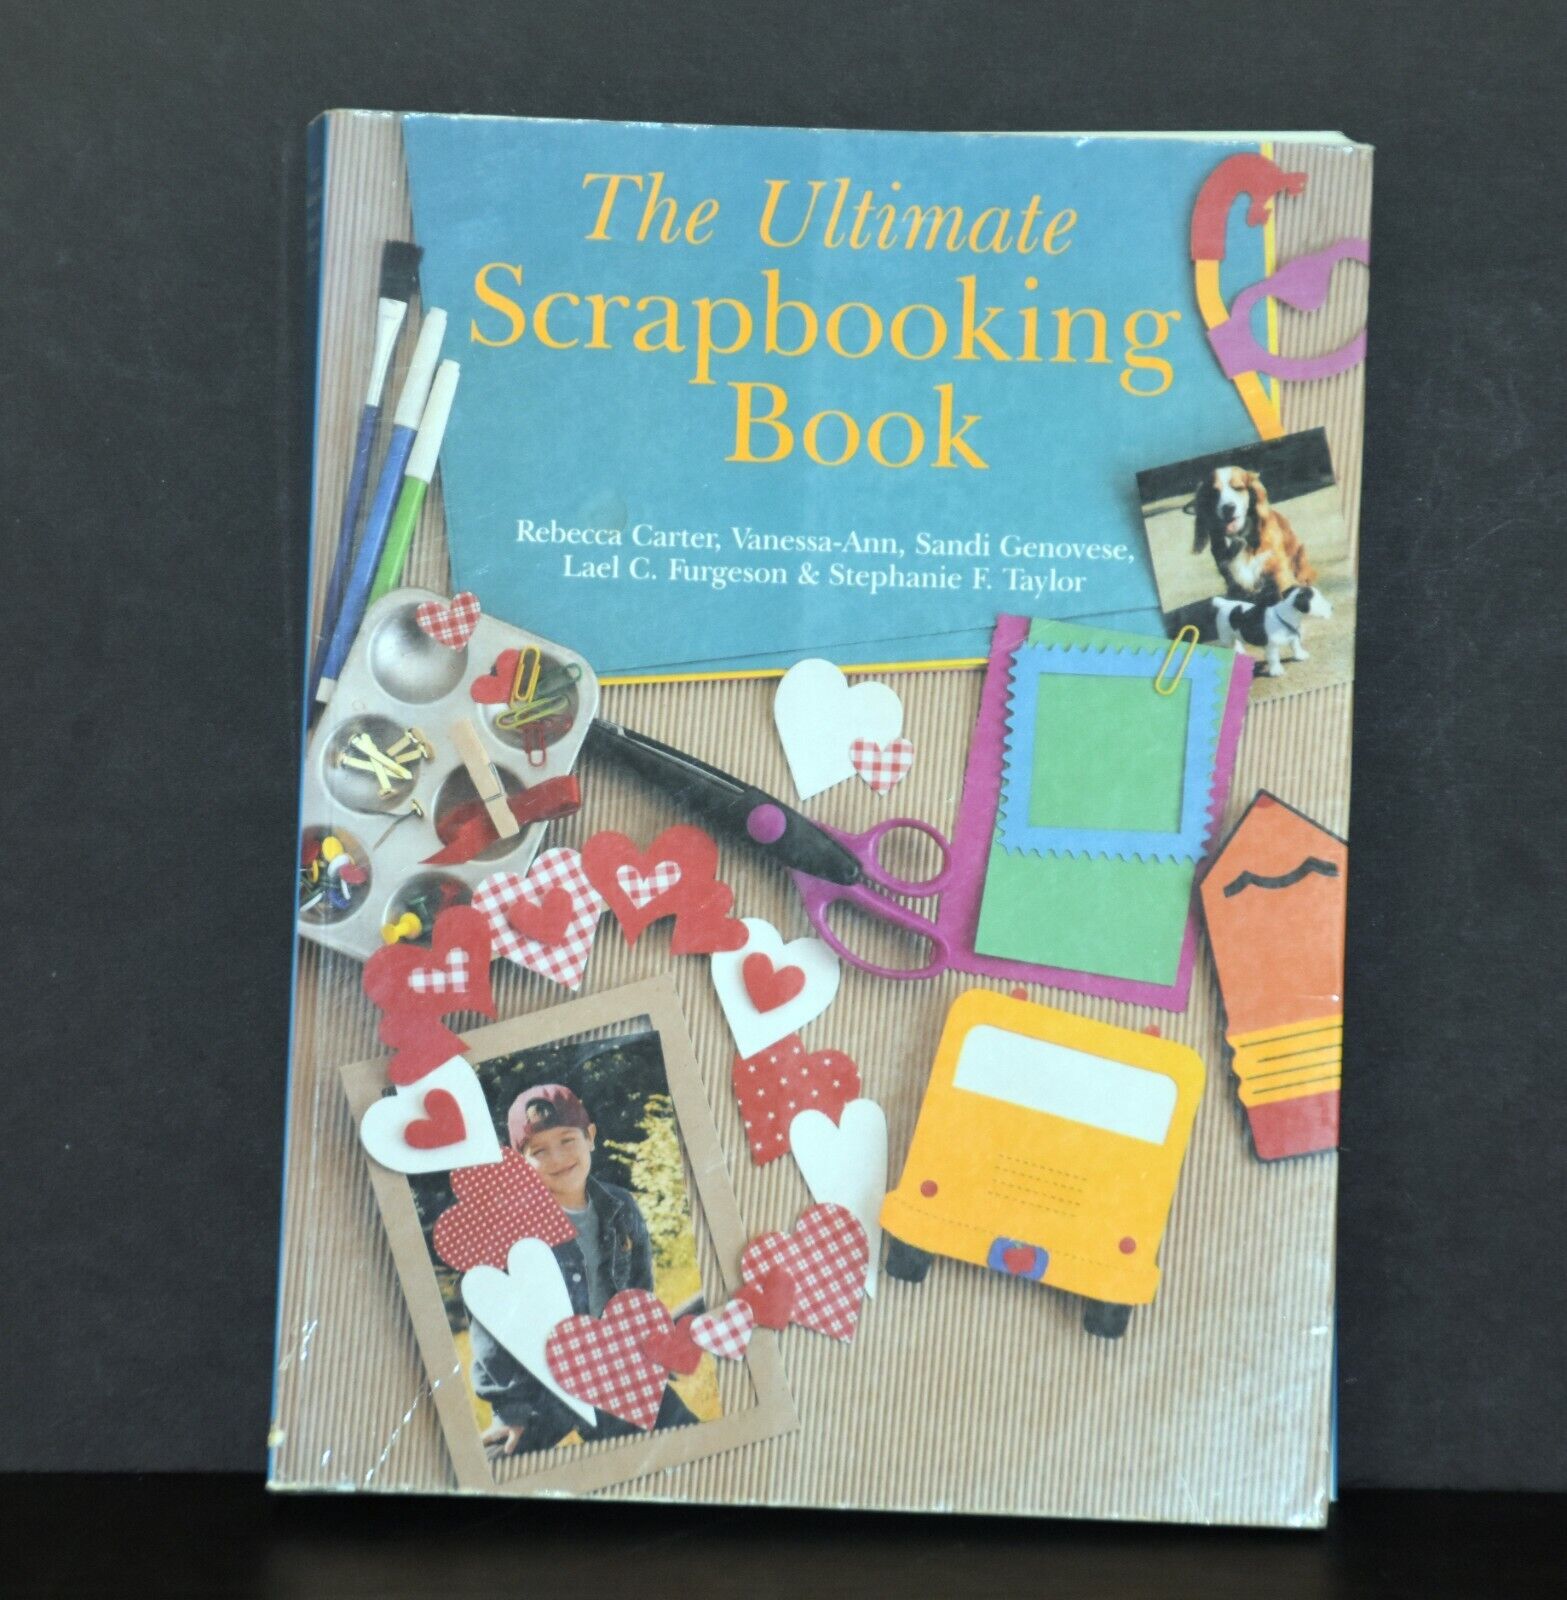 The Ultimate Scrapbooking Book Paperback 2002